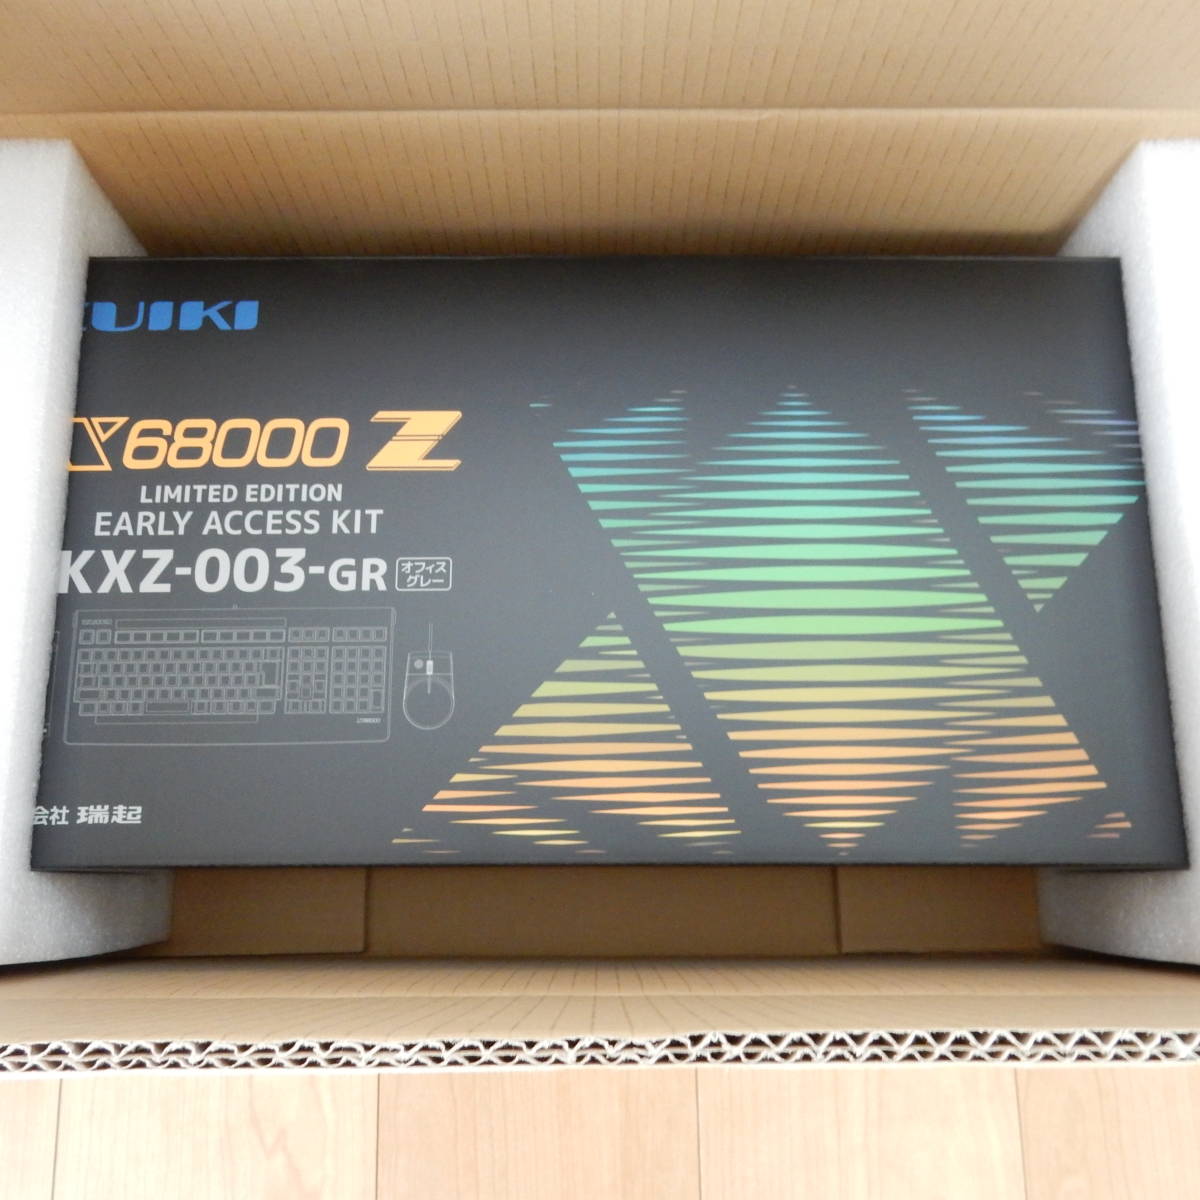 X68000 Z LIMITED EDITION EARLY ACCESS KIT 第2ロット X68000z X68K